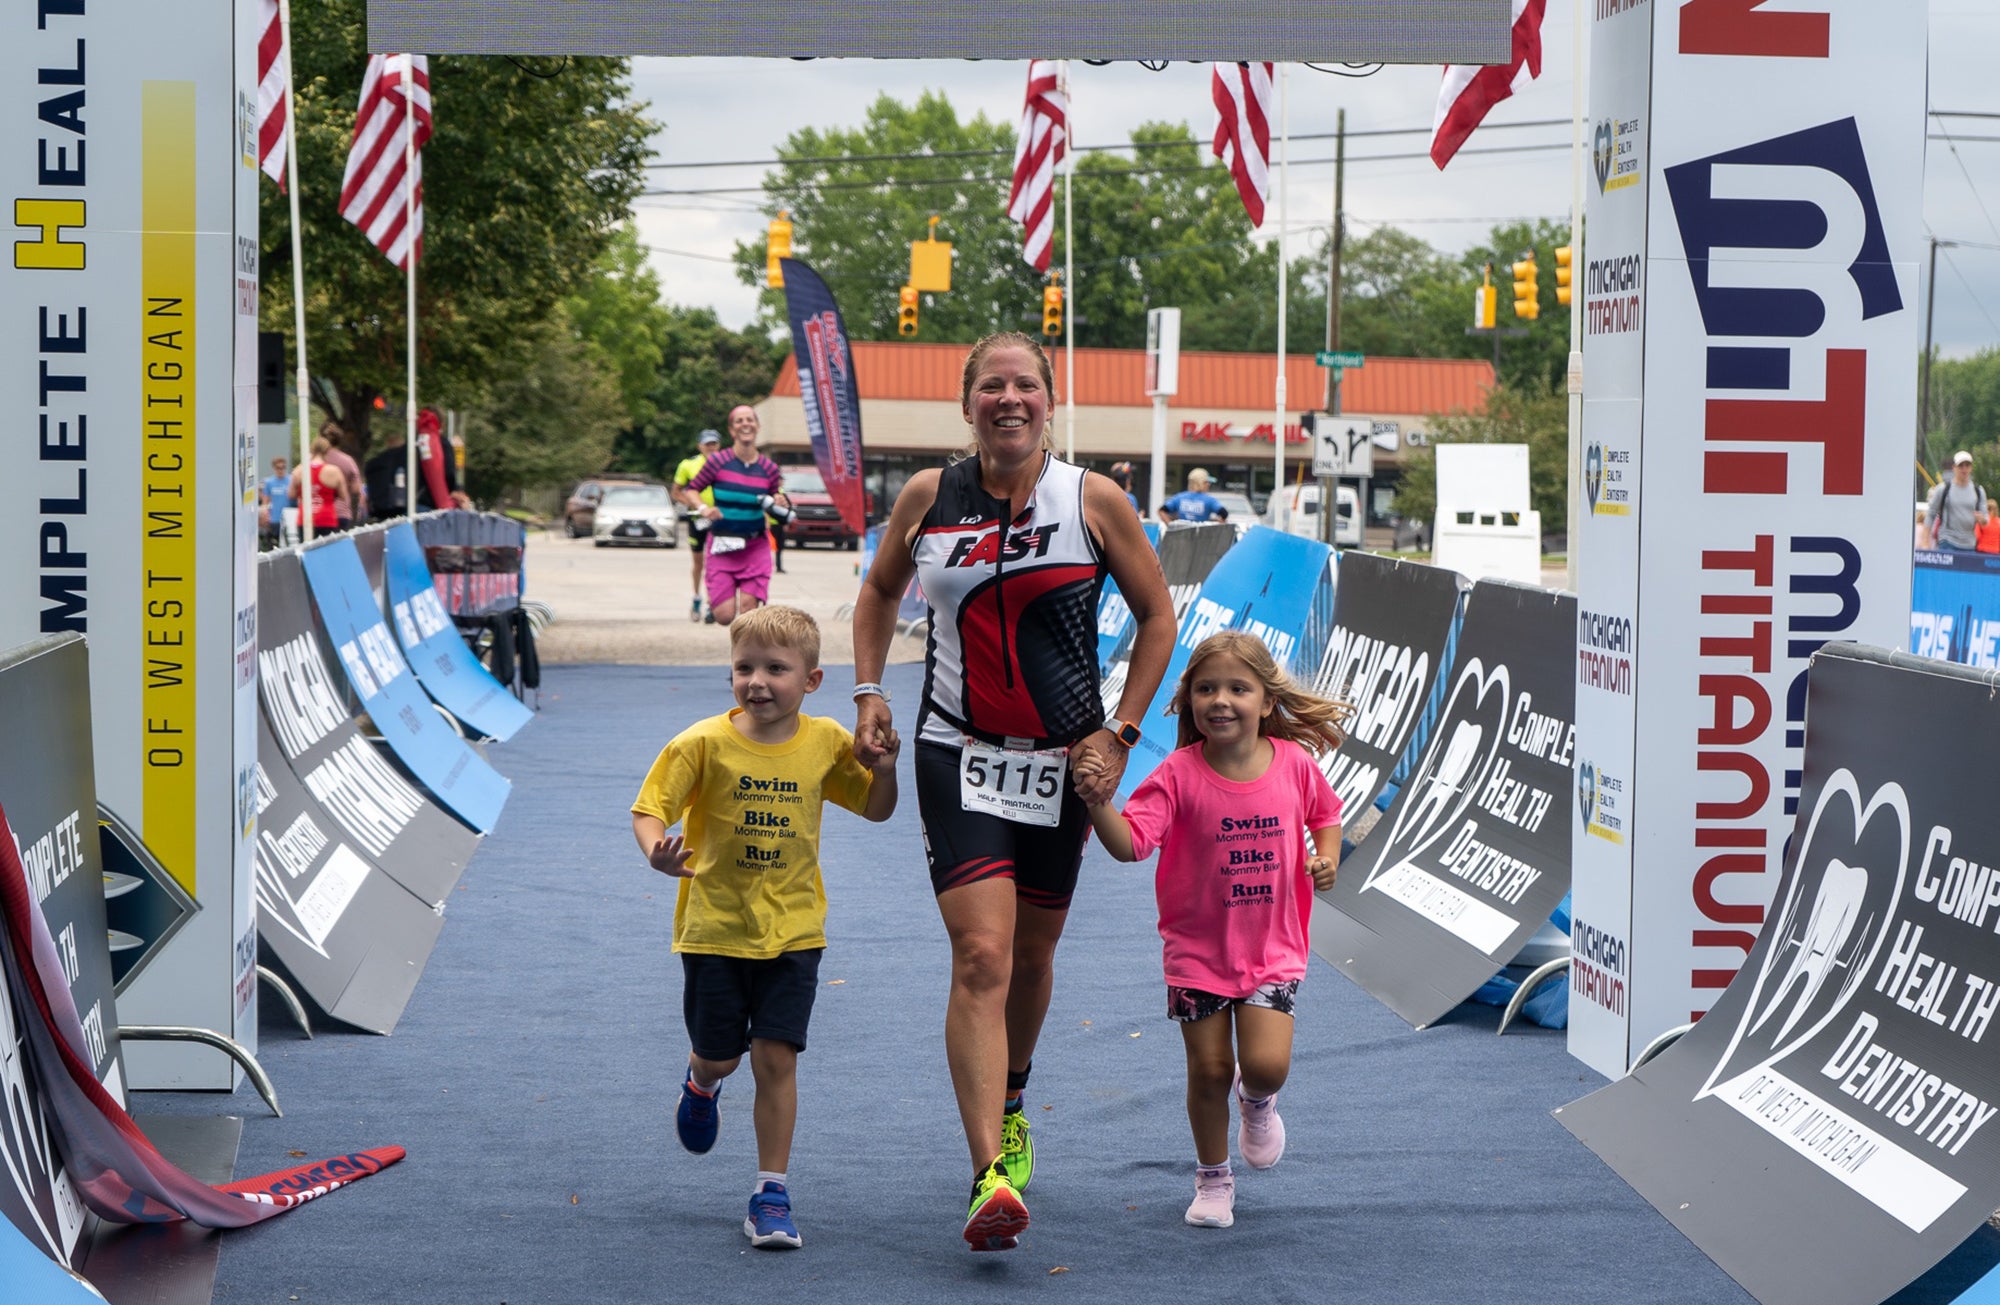 Michigan Titanium triathlon, one of the best iron-distance races not an Ironman in the usa